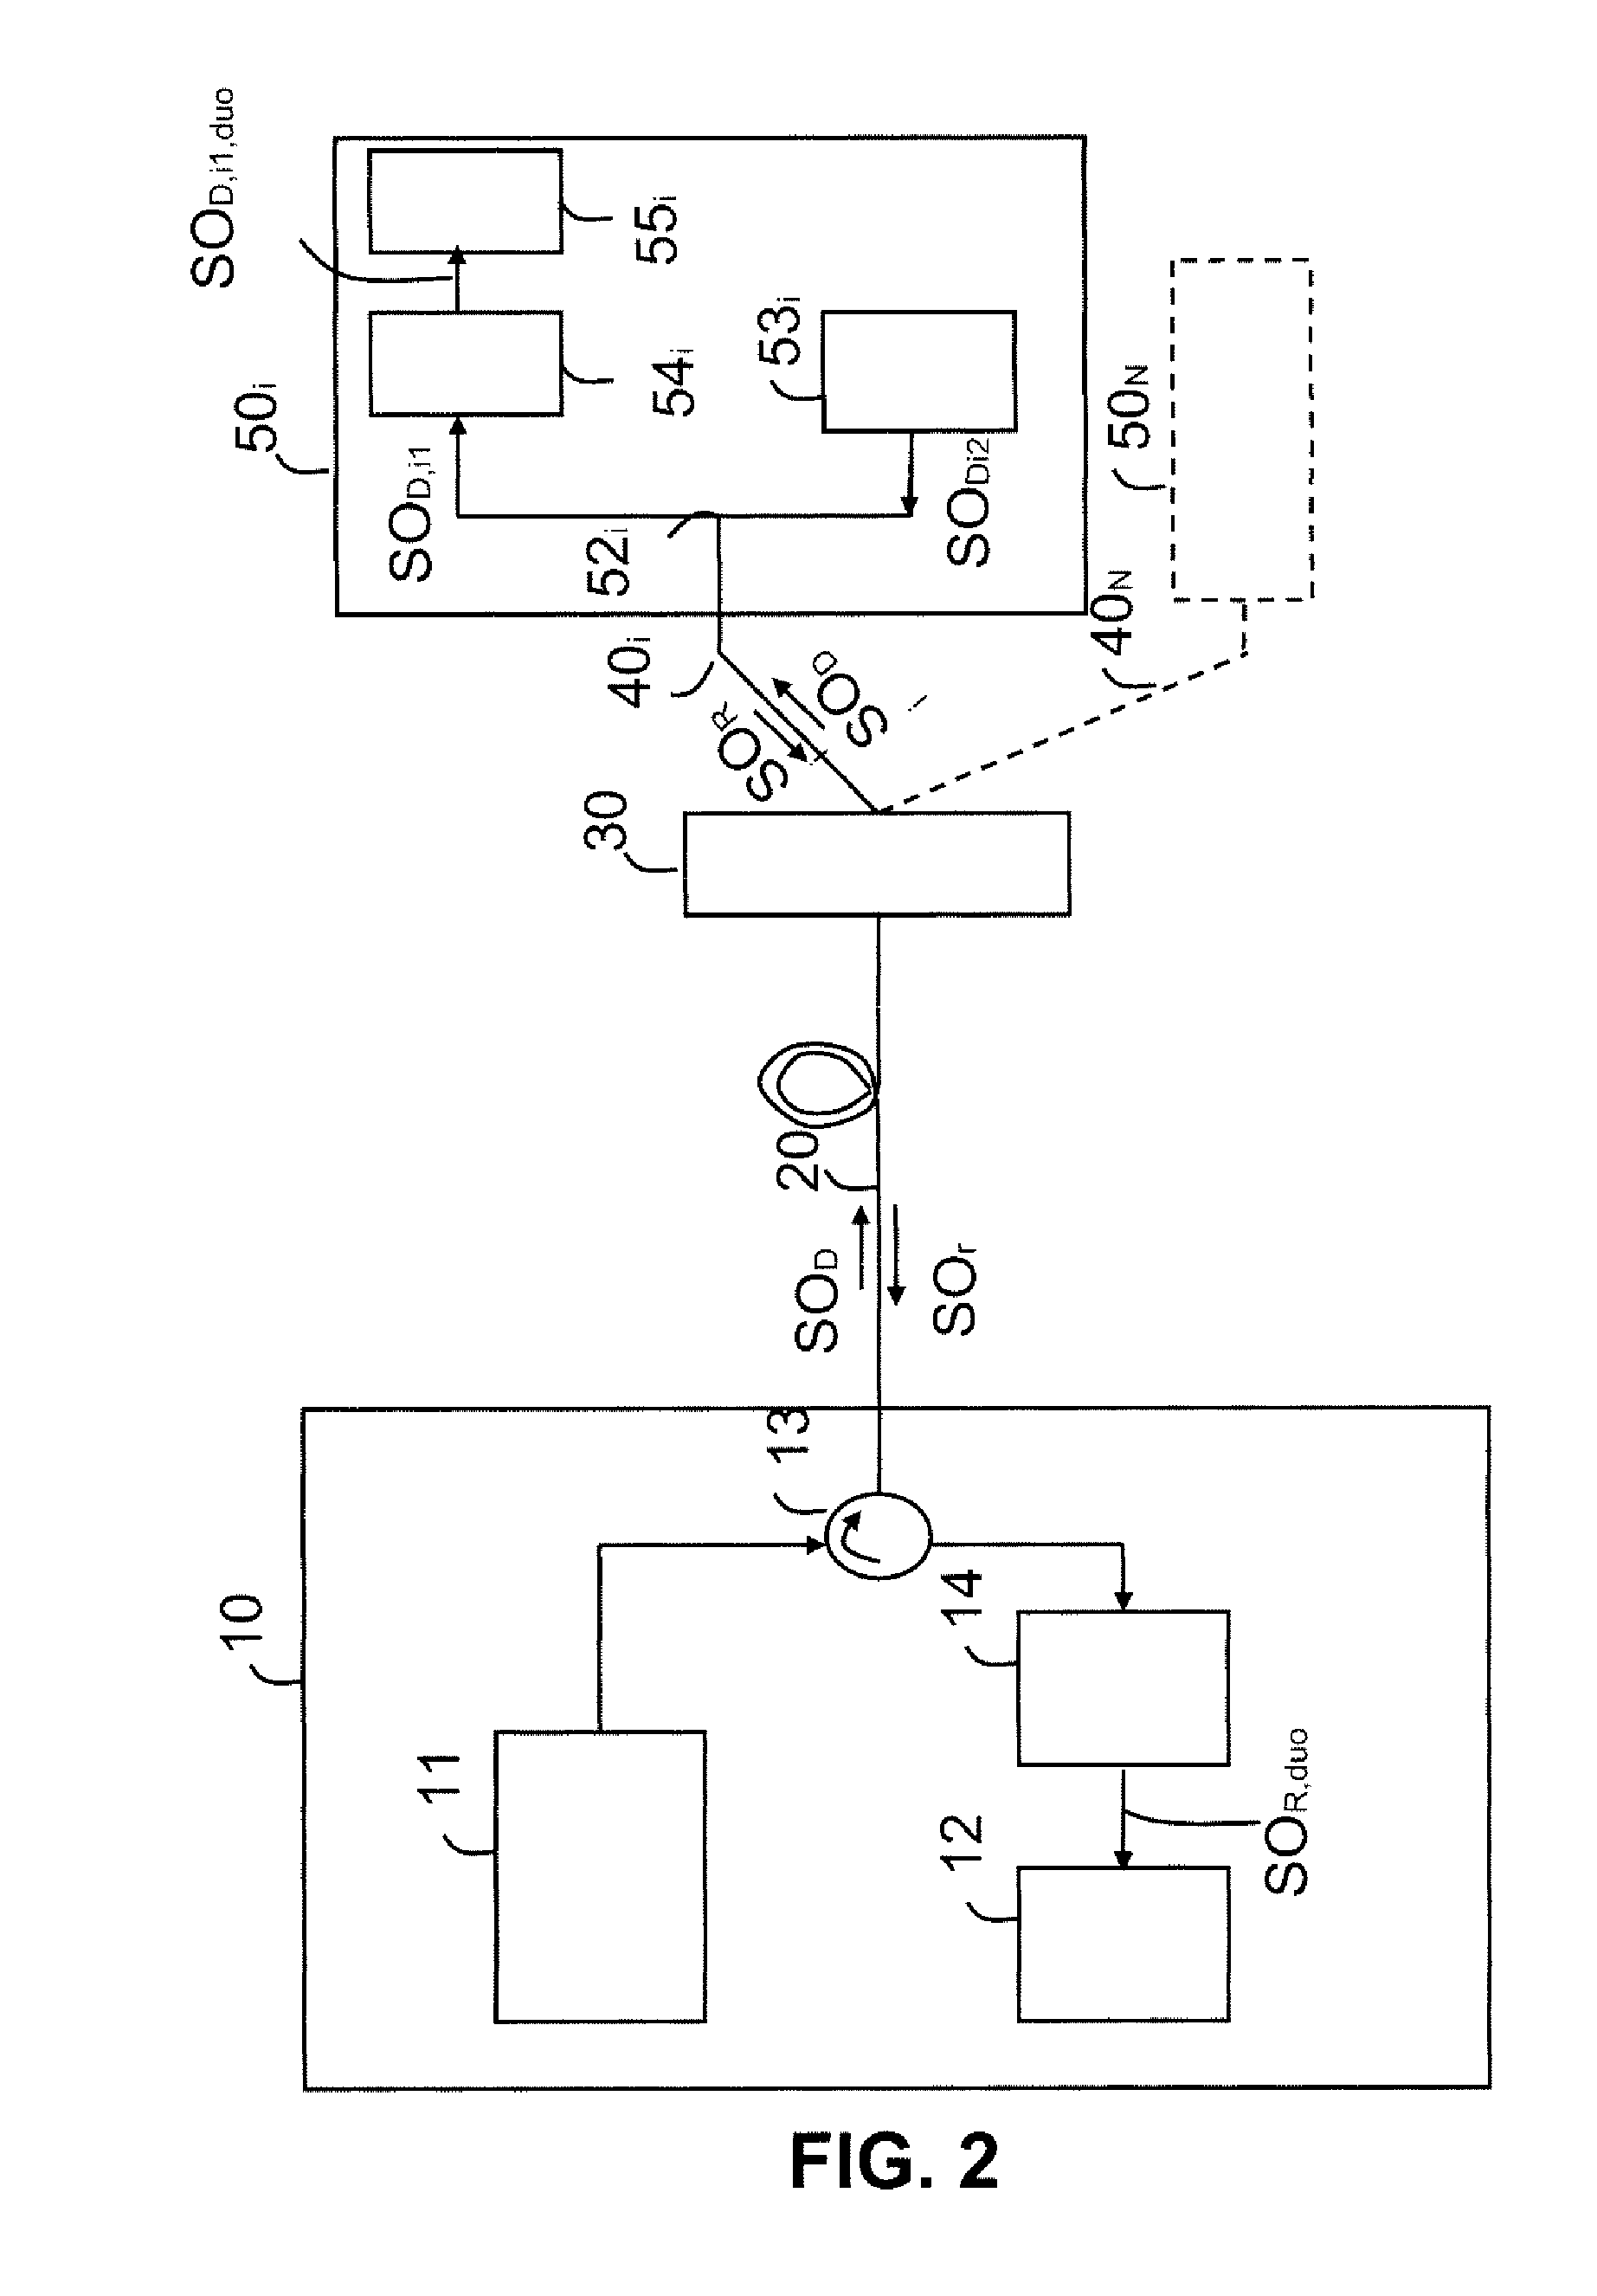 High bit rate bidirectional passive optical network, associated optical exchange and line termination device